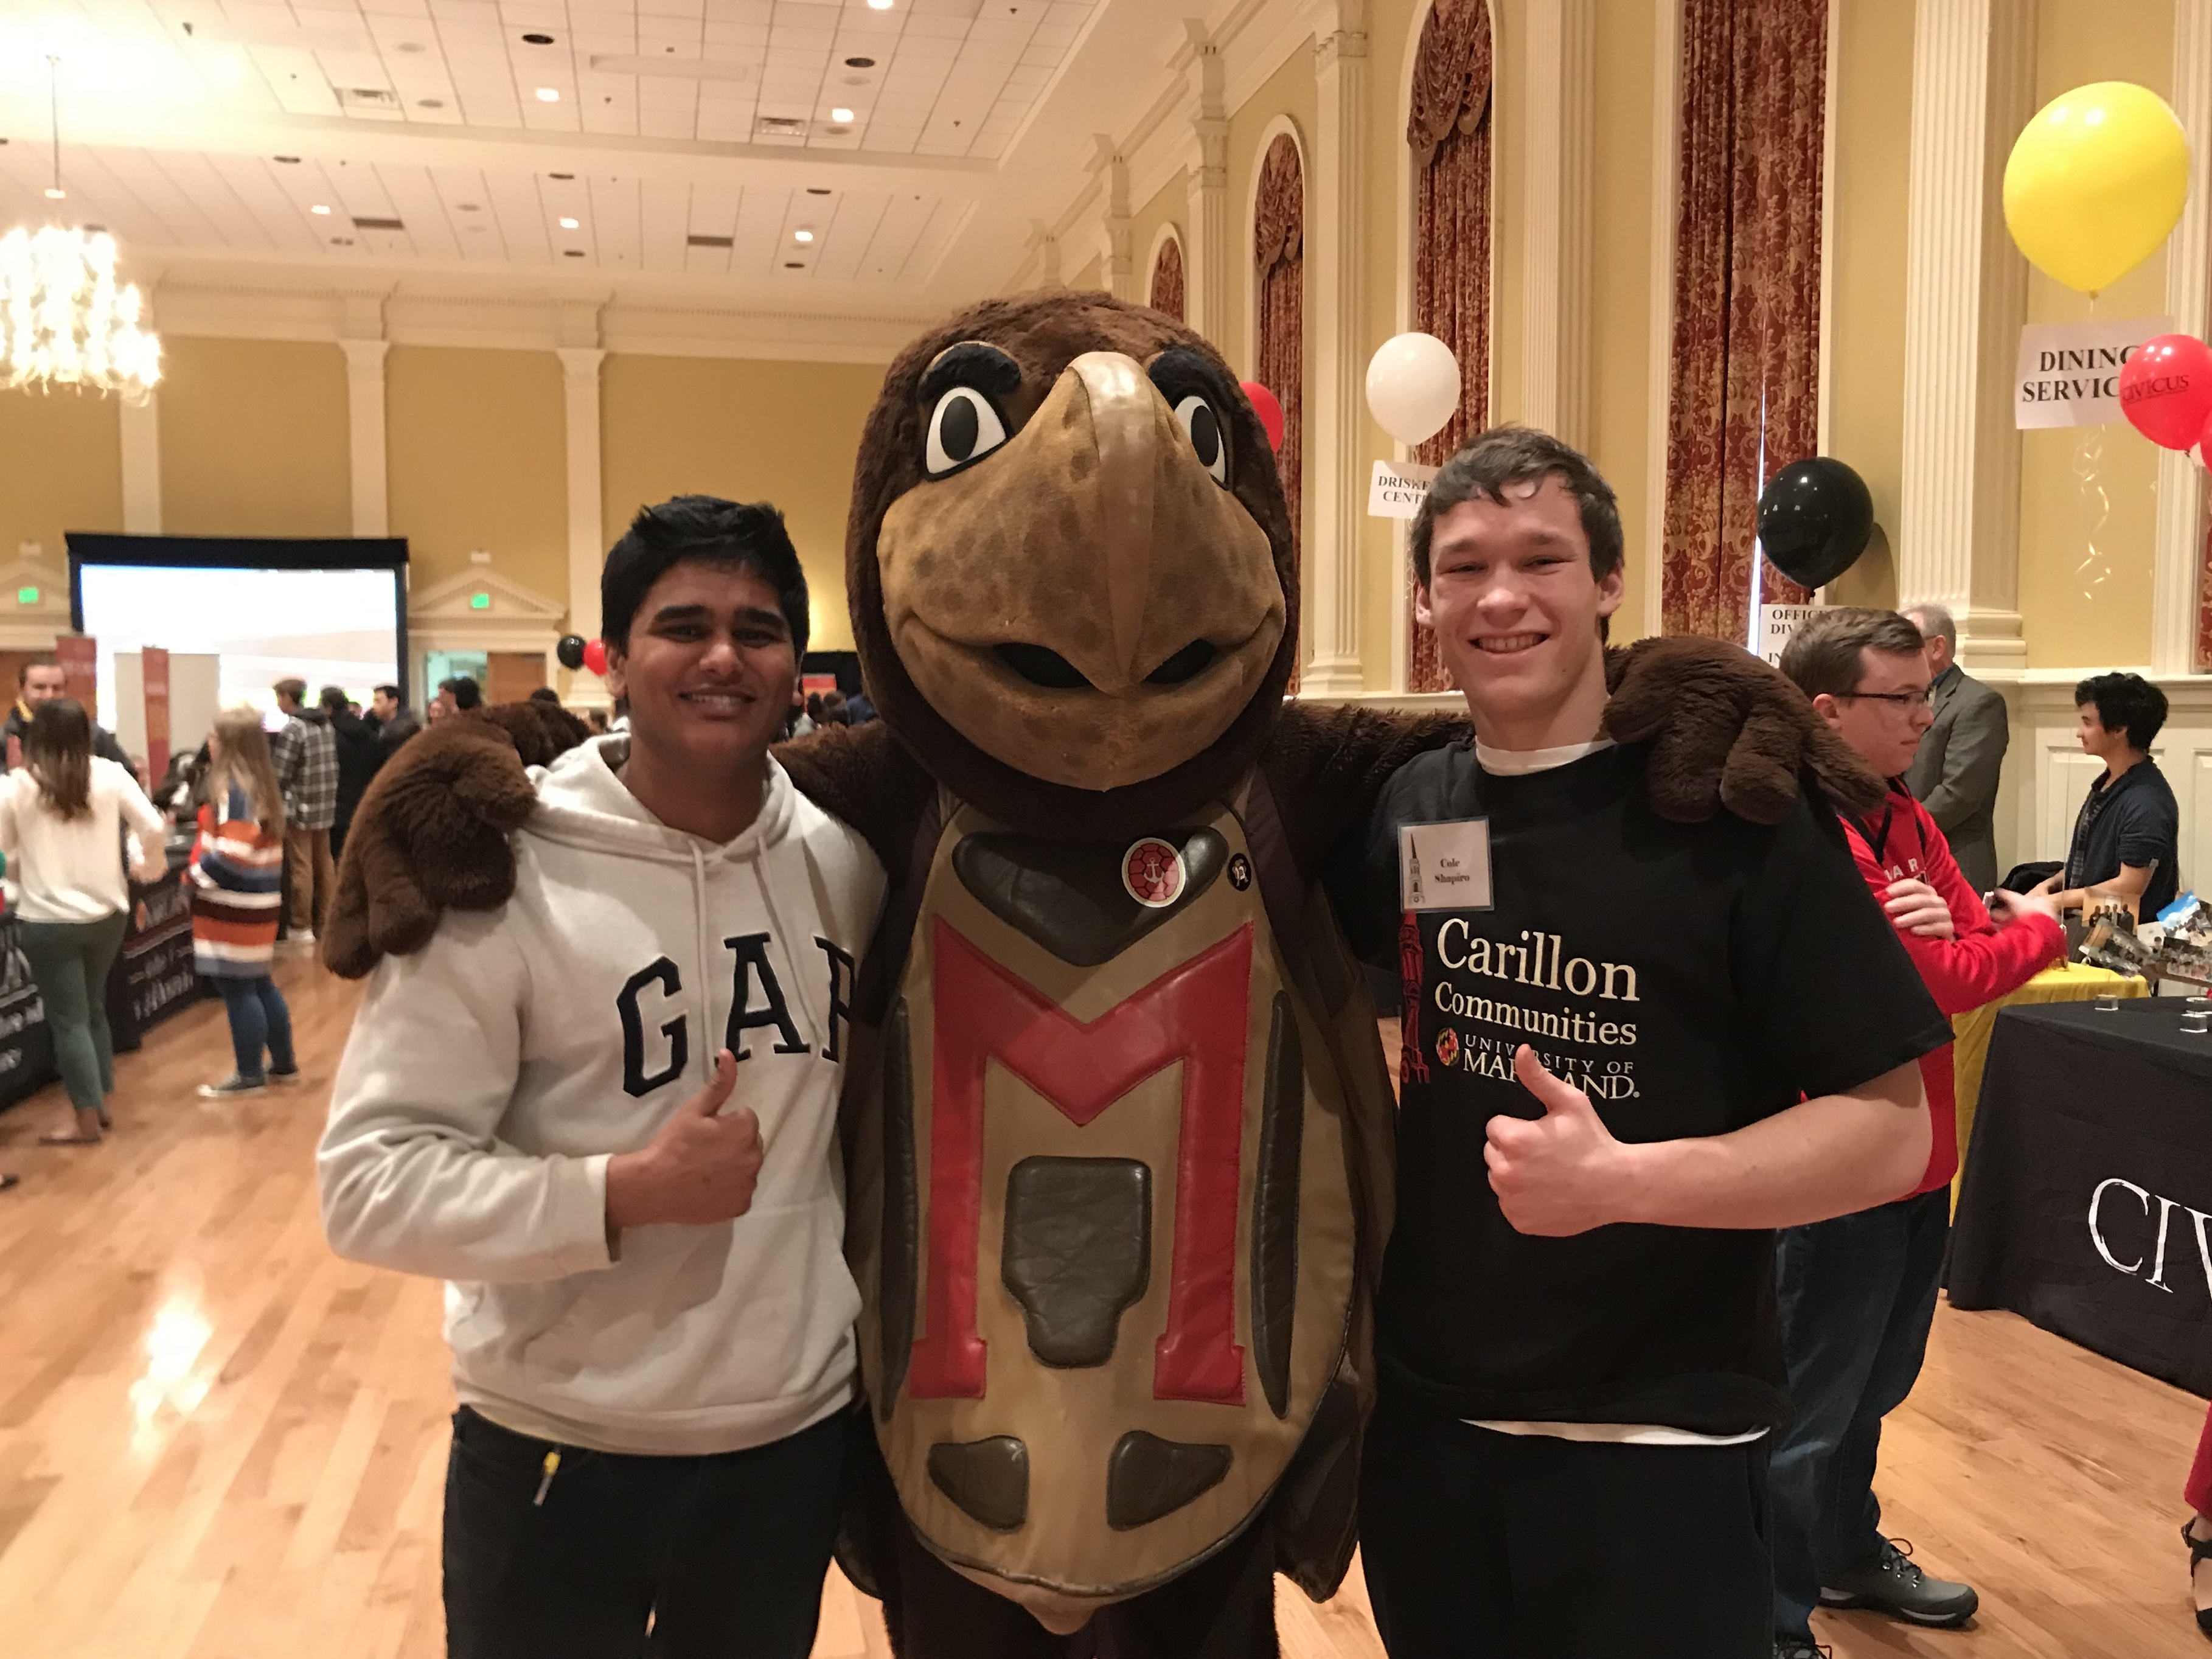 Students at pose with Testudo, the UMD Mascot